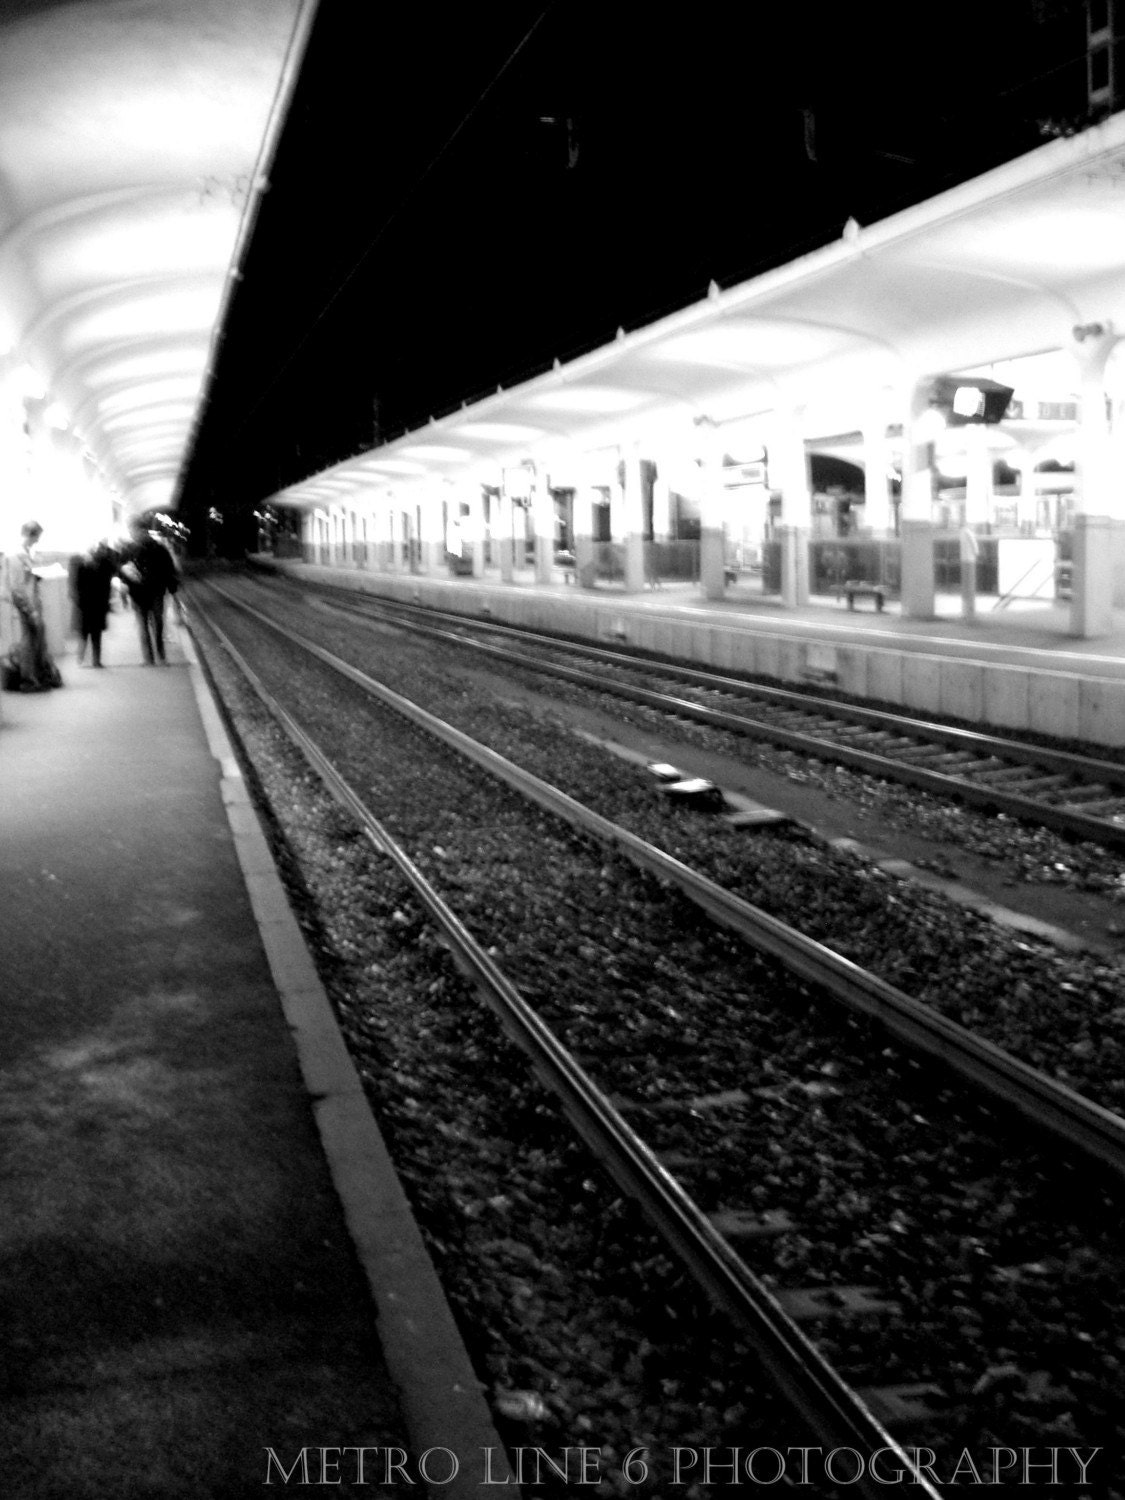 Train station in Saint Brieuc 8x10 Black and White Photography Print